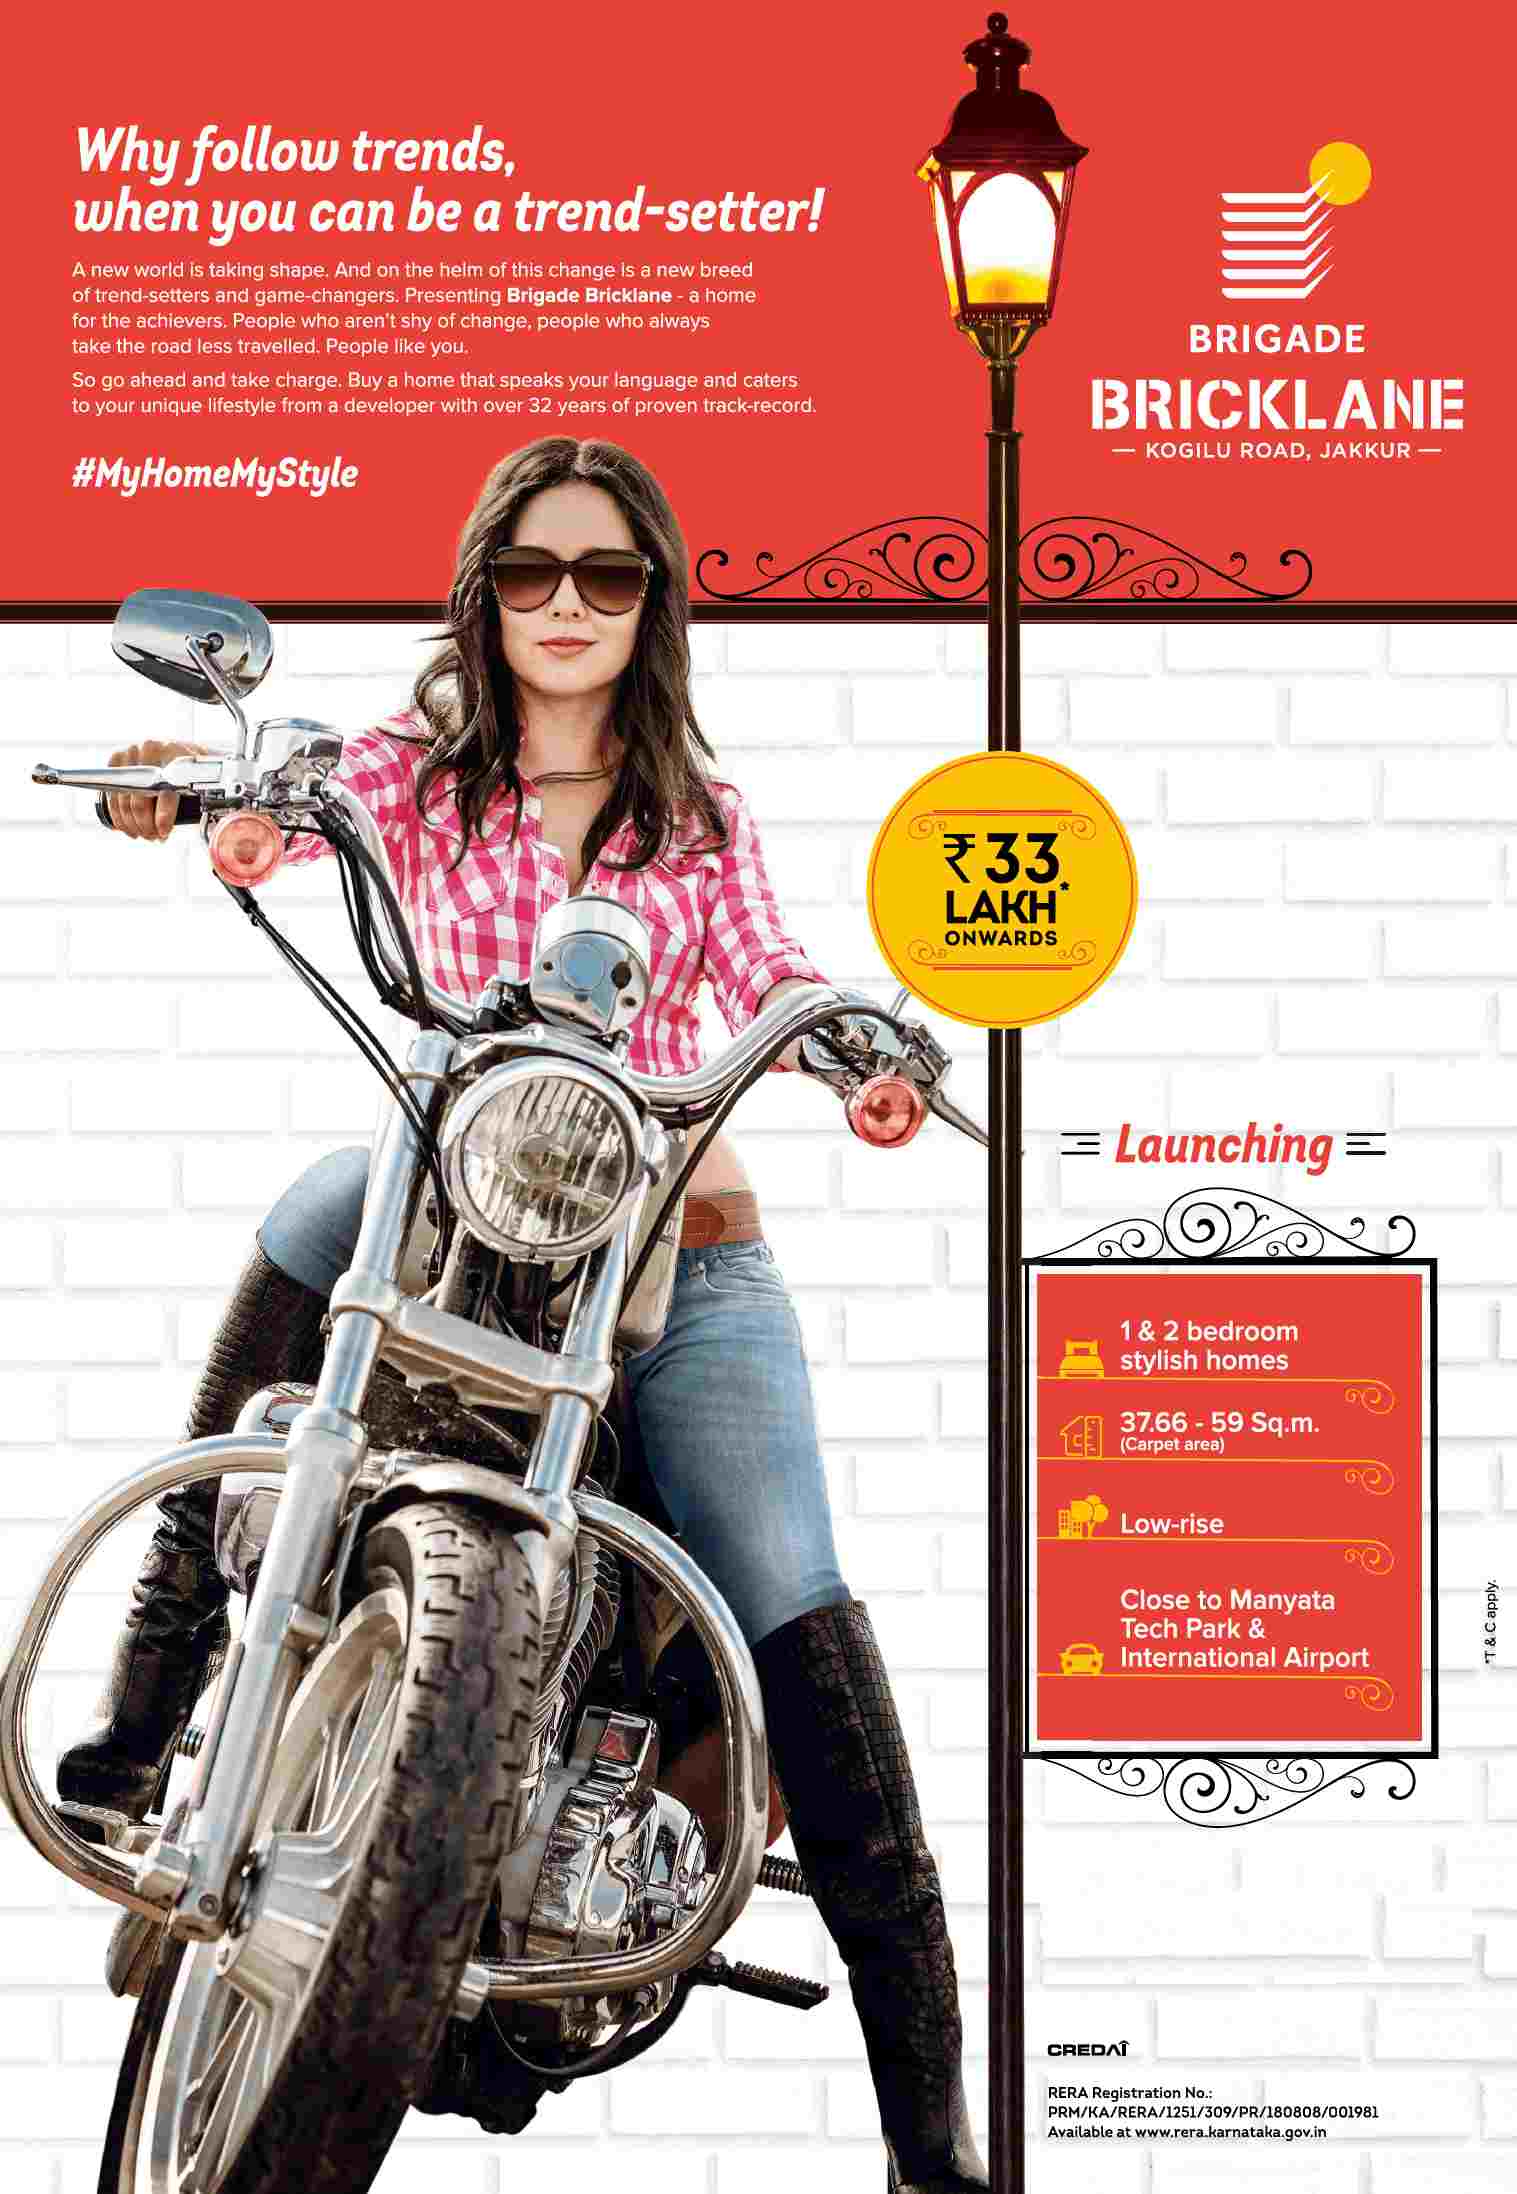 Avail the benefits of PMAY scheme & save up to 22.67 lakhs at Brigade Bricklane in Bangalore Update